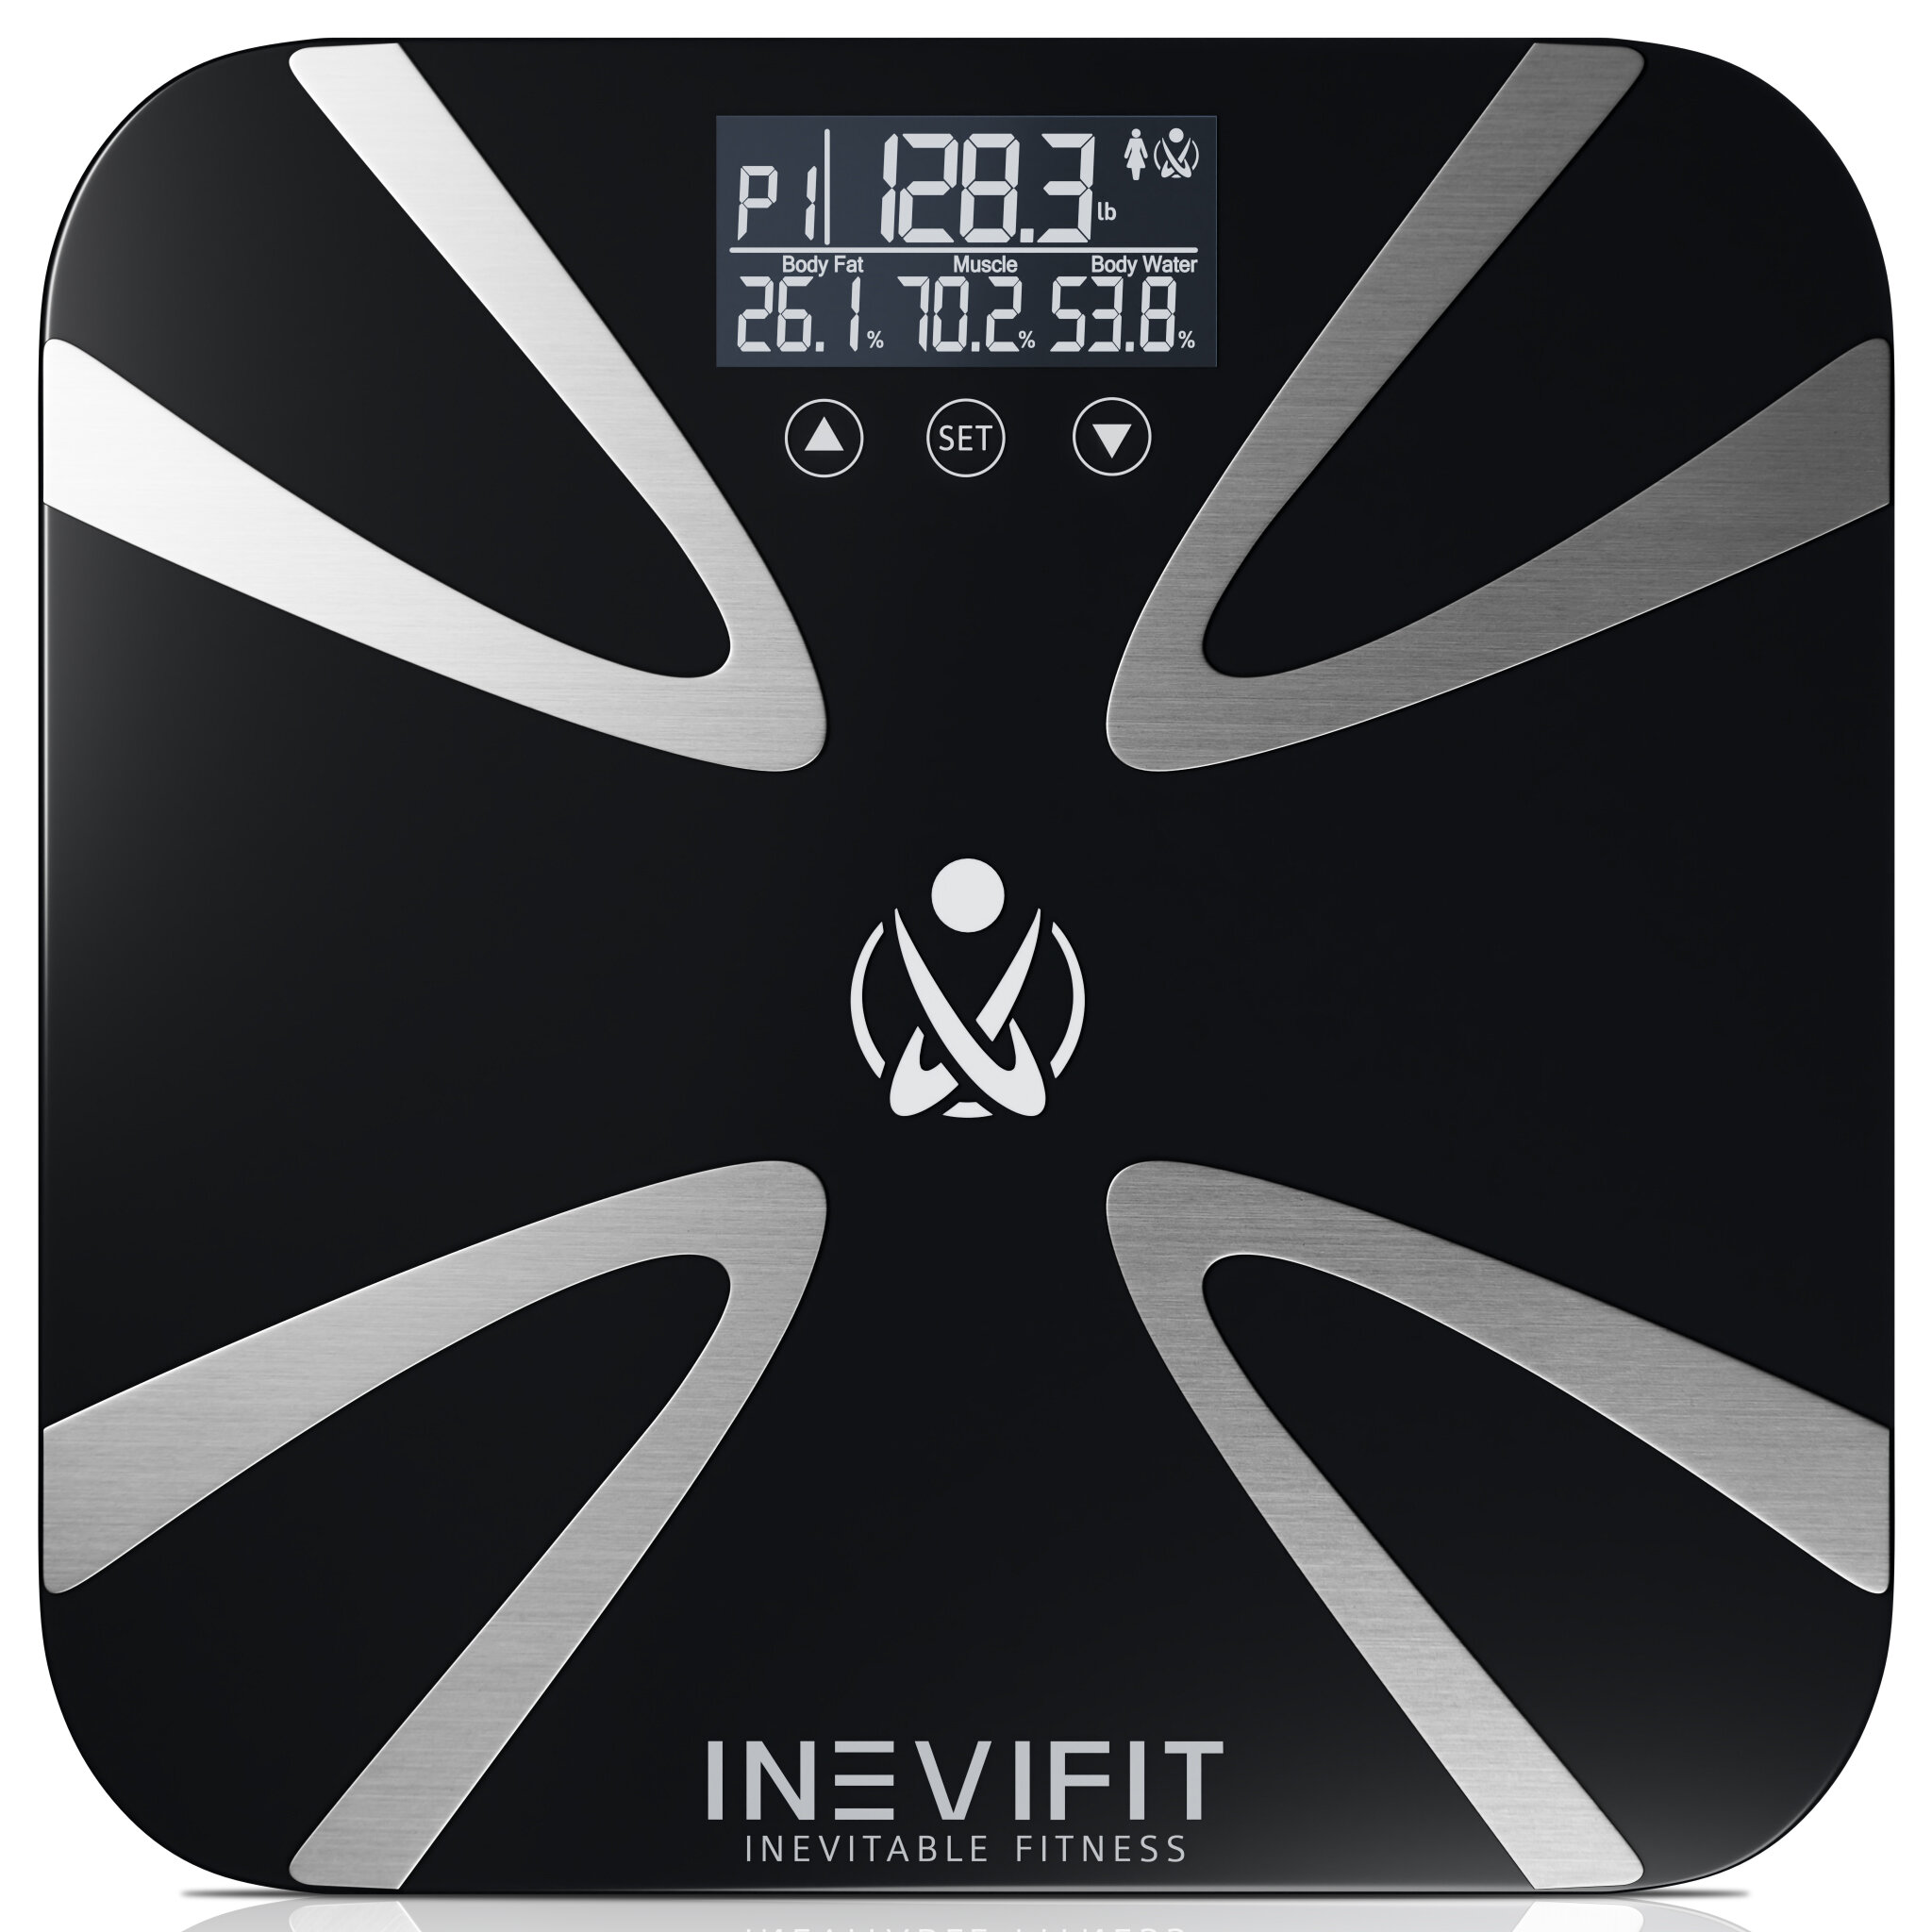 Body Weight Scale, Smart BMI Scale Digital Bathroom Scales,  Multi-Functional Home Use Intelligent Body Fat Scale, Body Composition  Monitor Health Analyzer 